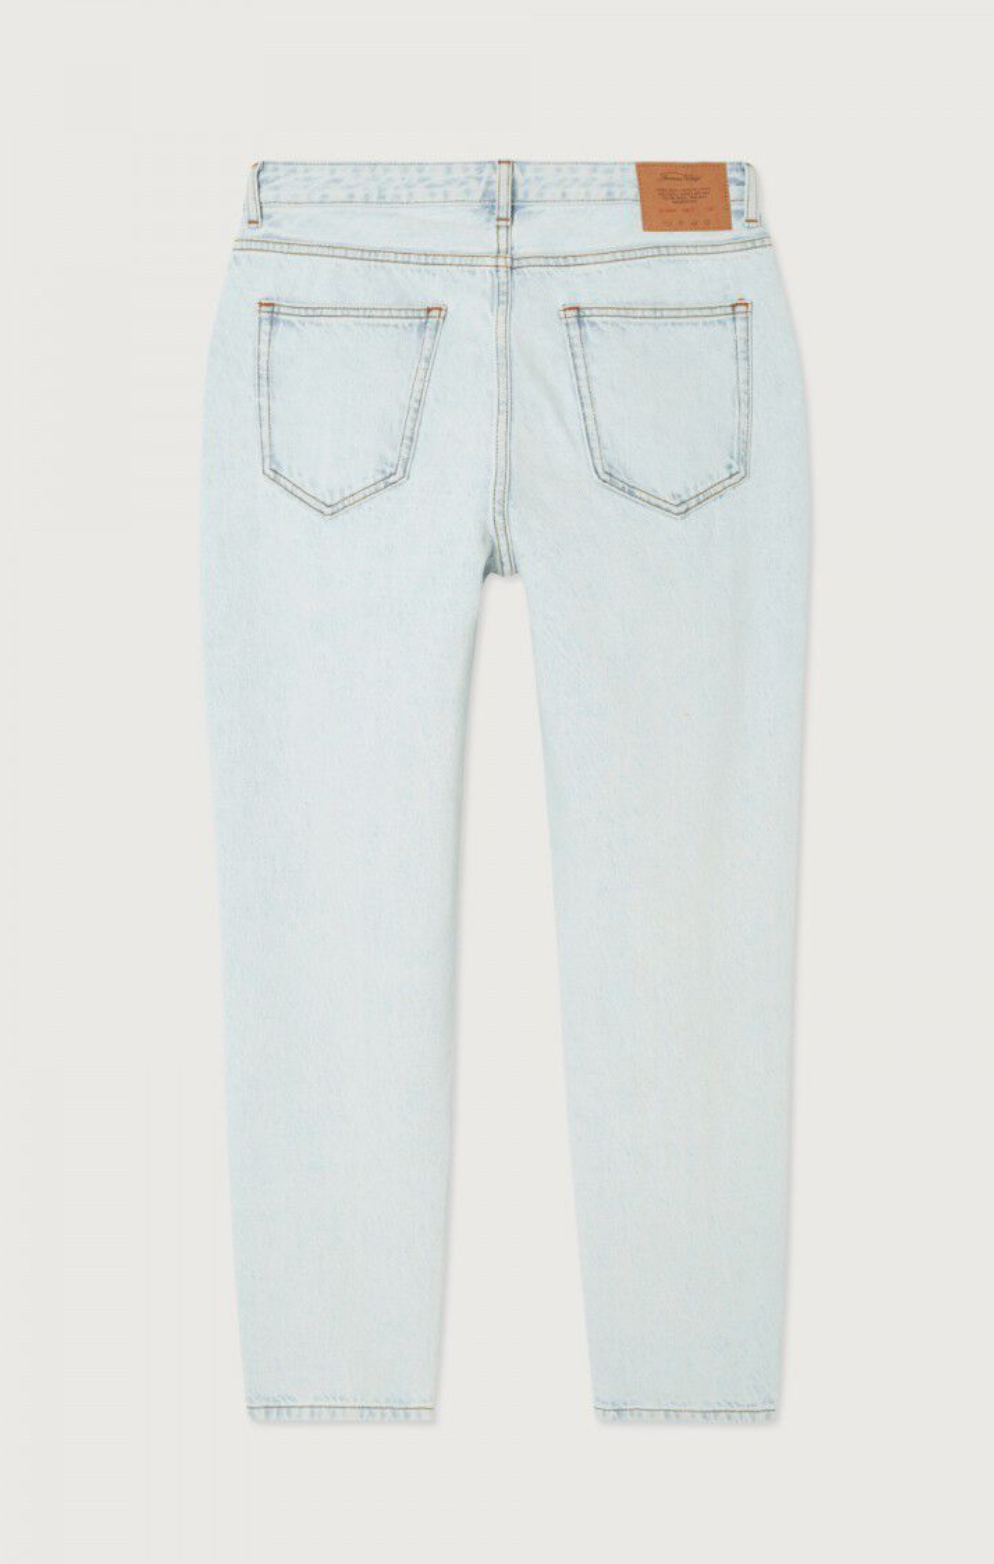 A flat lay image of the backside of the Joybird Carrot Jeans in Winter Bleached